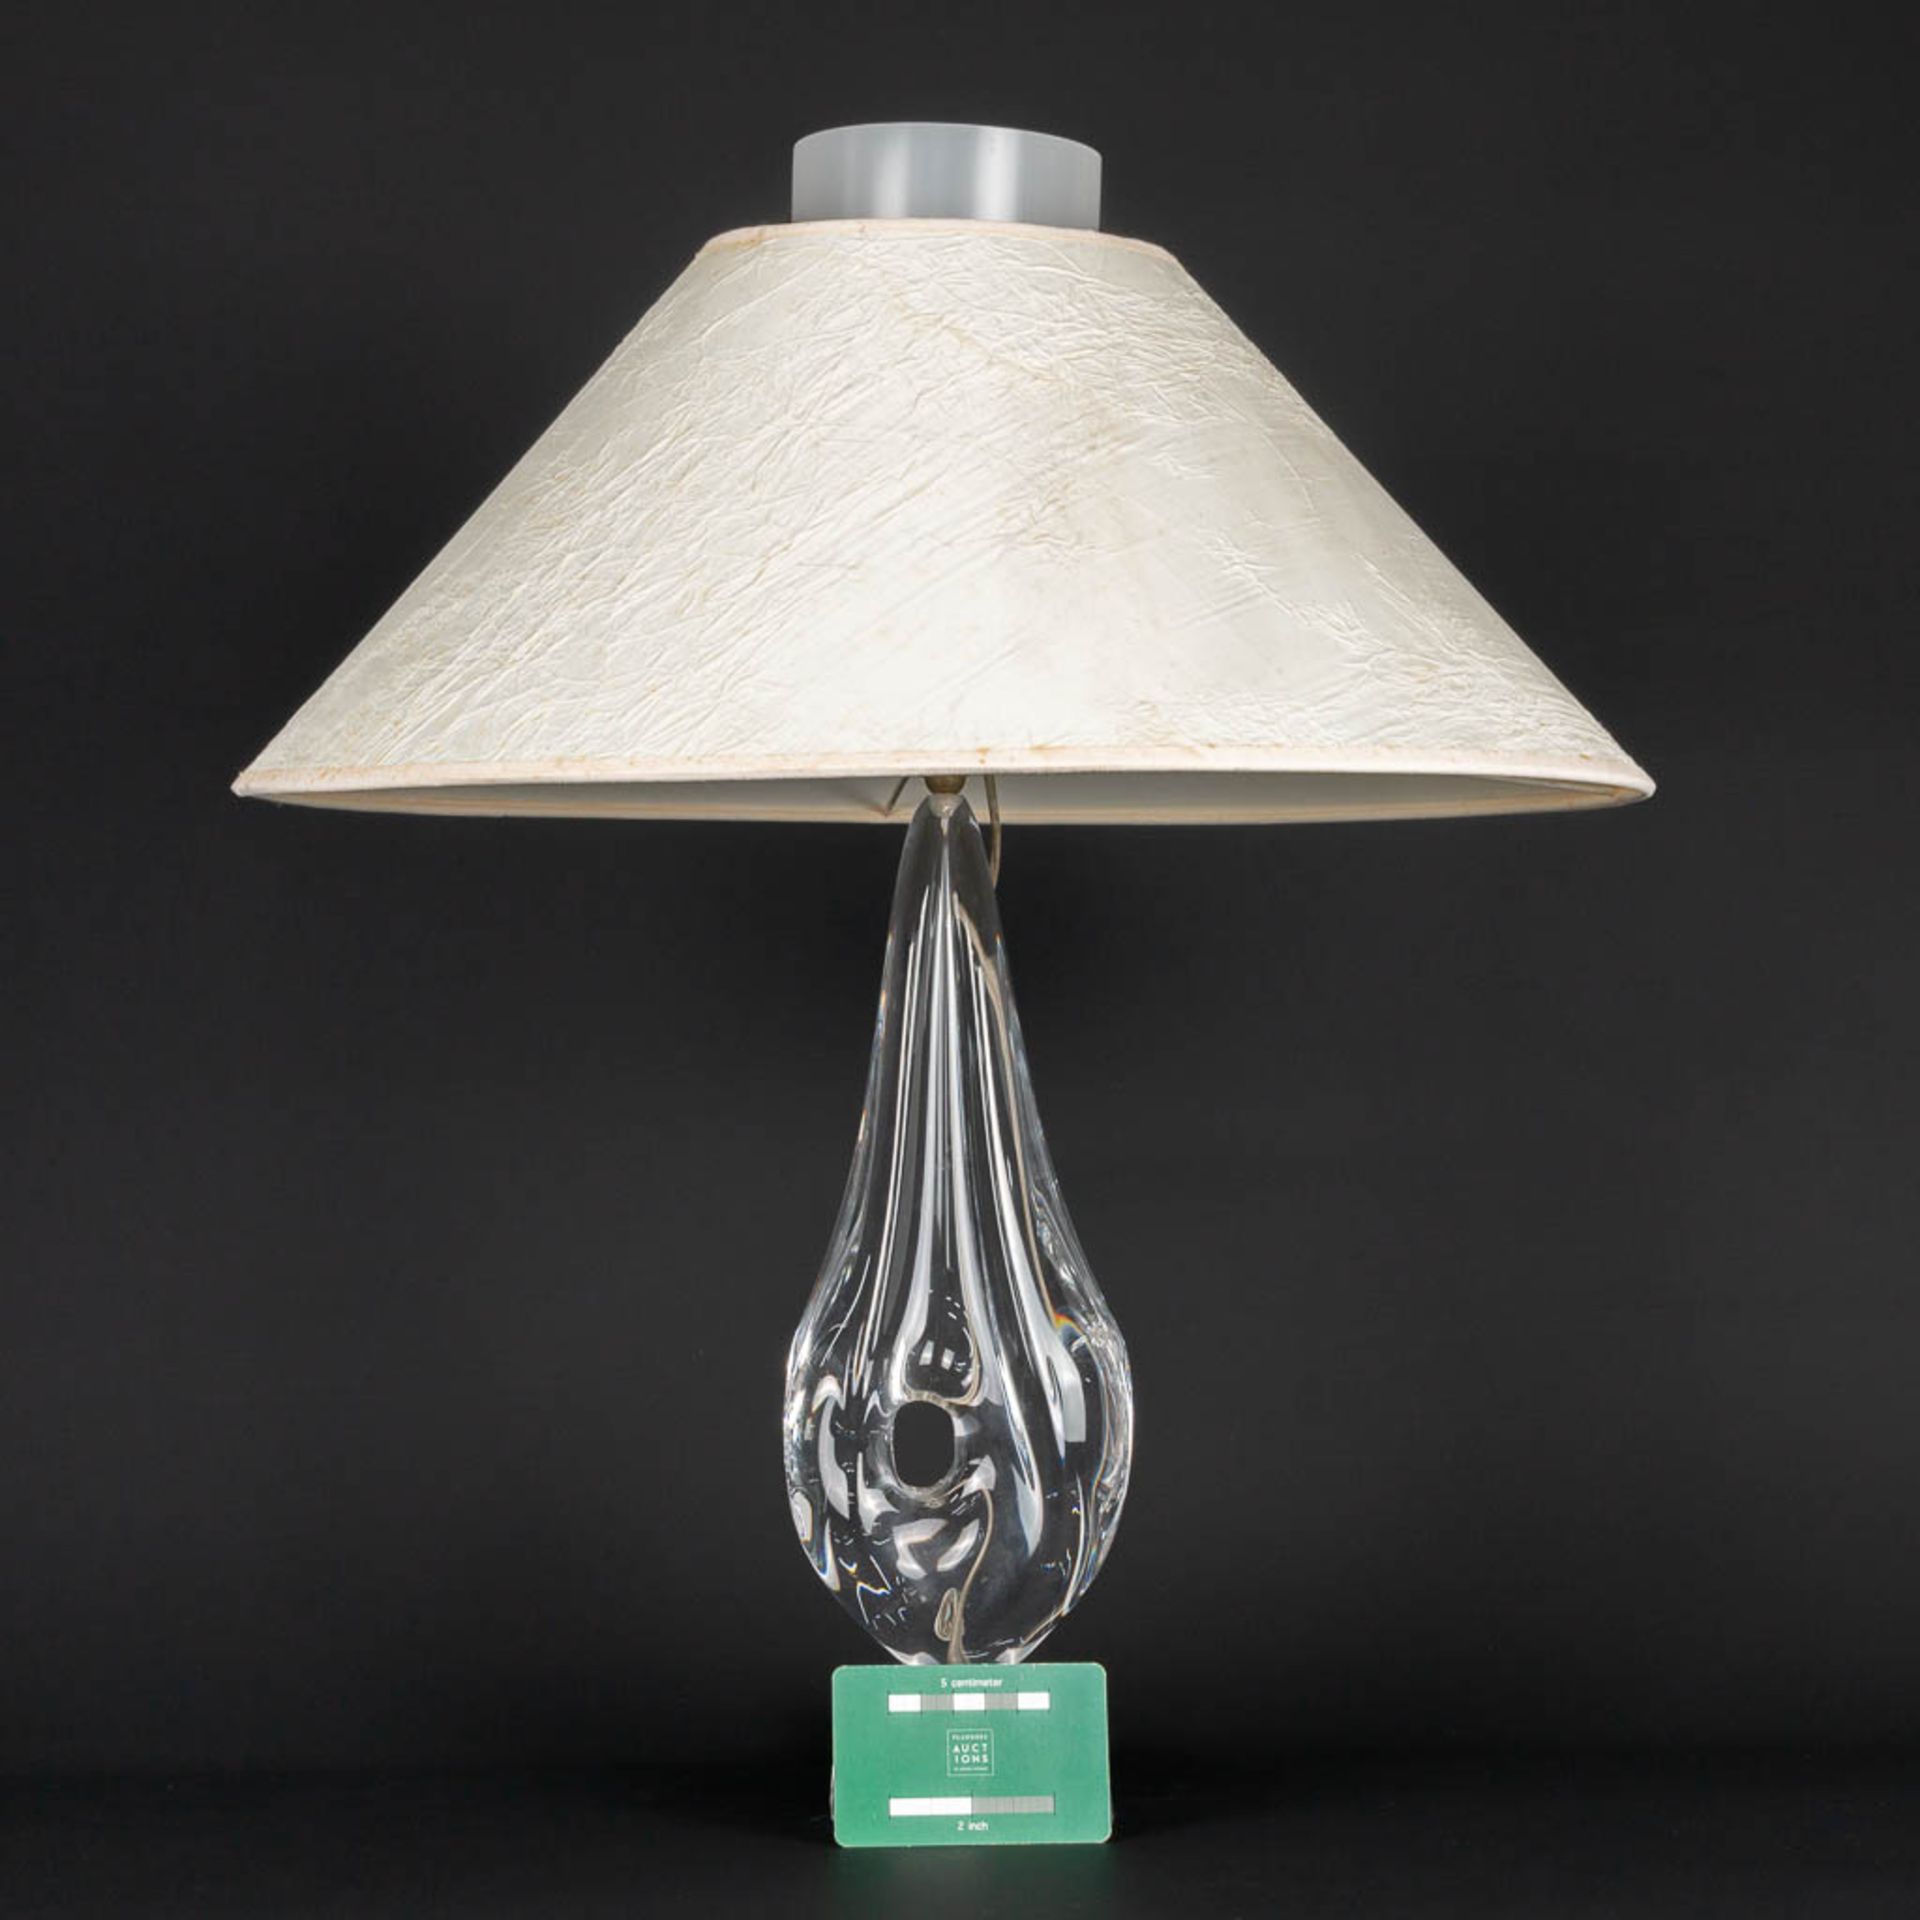 A Daum Nancy table lamp made of crystal with a fabric lamp shade. 20th century. (9 x 9 x 33 cm) - Image 8 of 12